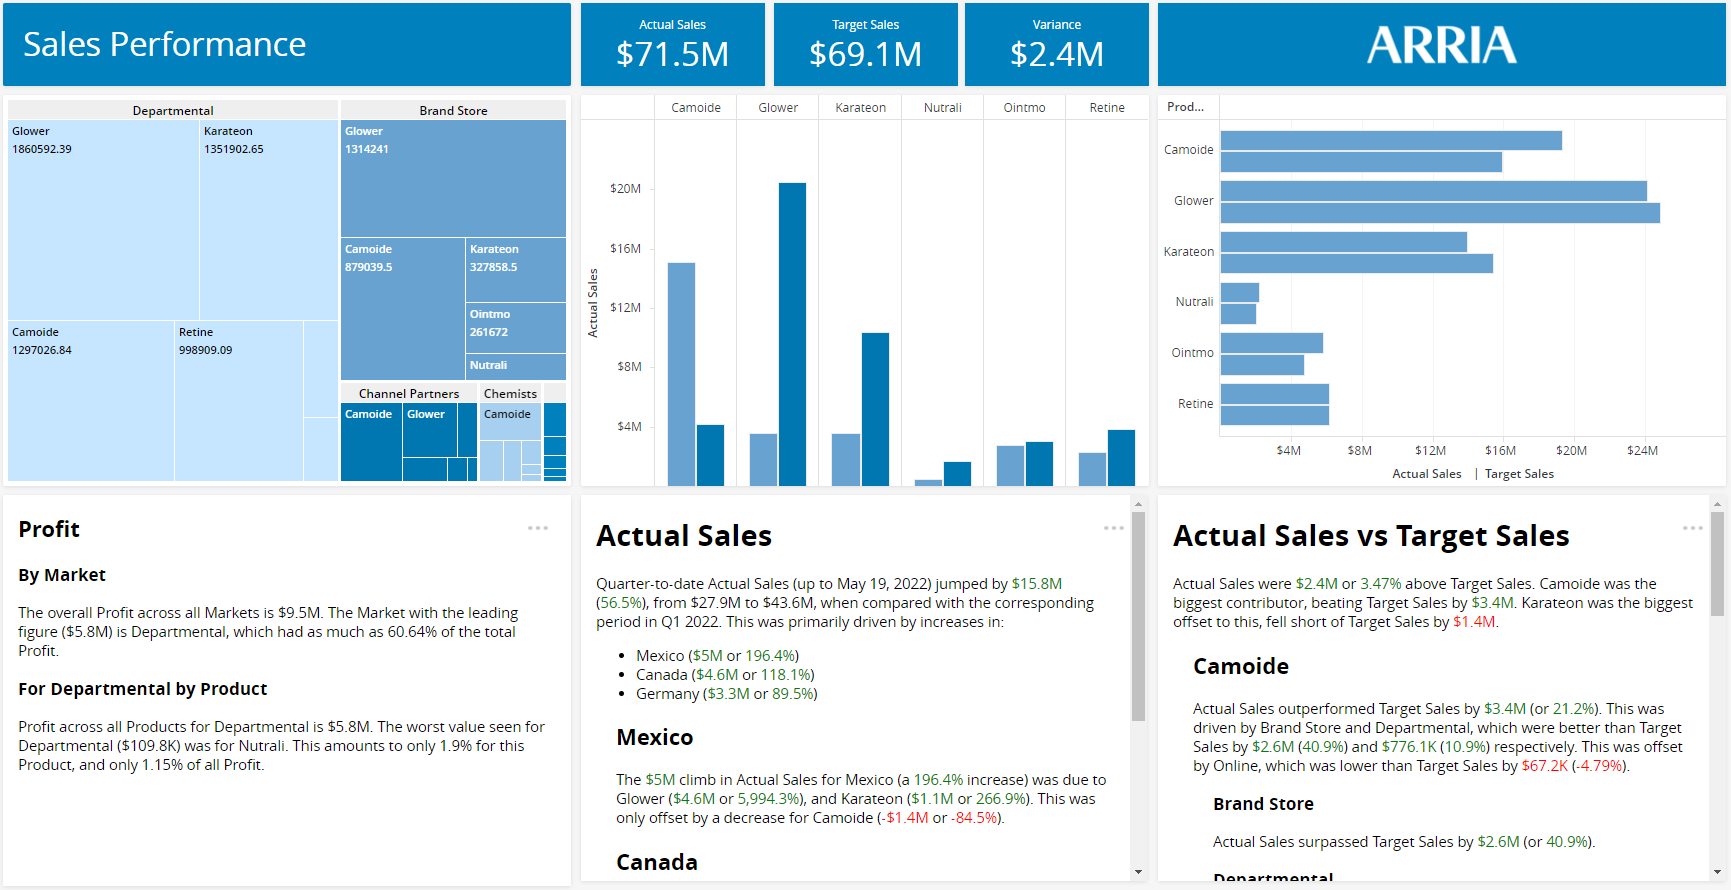 microstrategy-arria-showcase-analyze-sales-performance.png